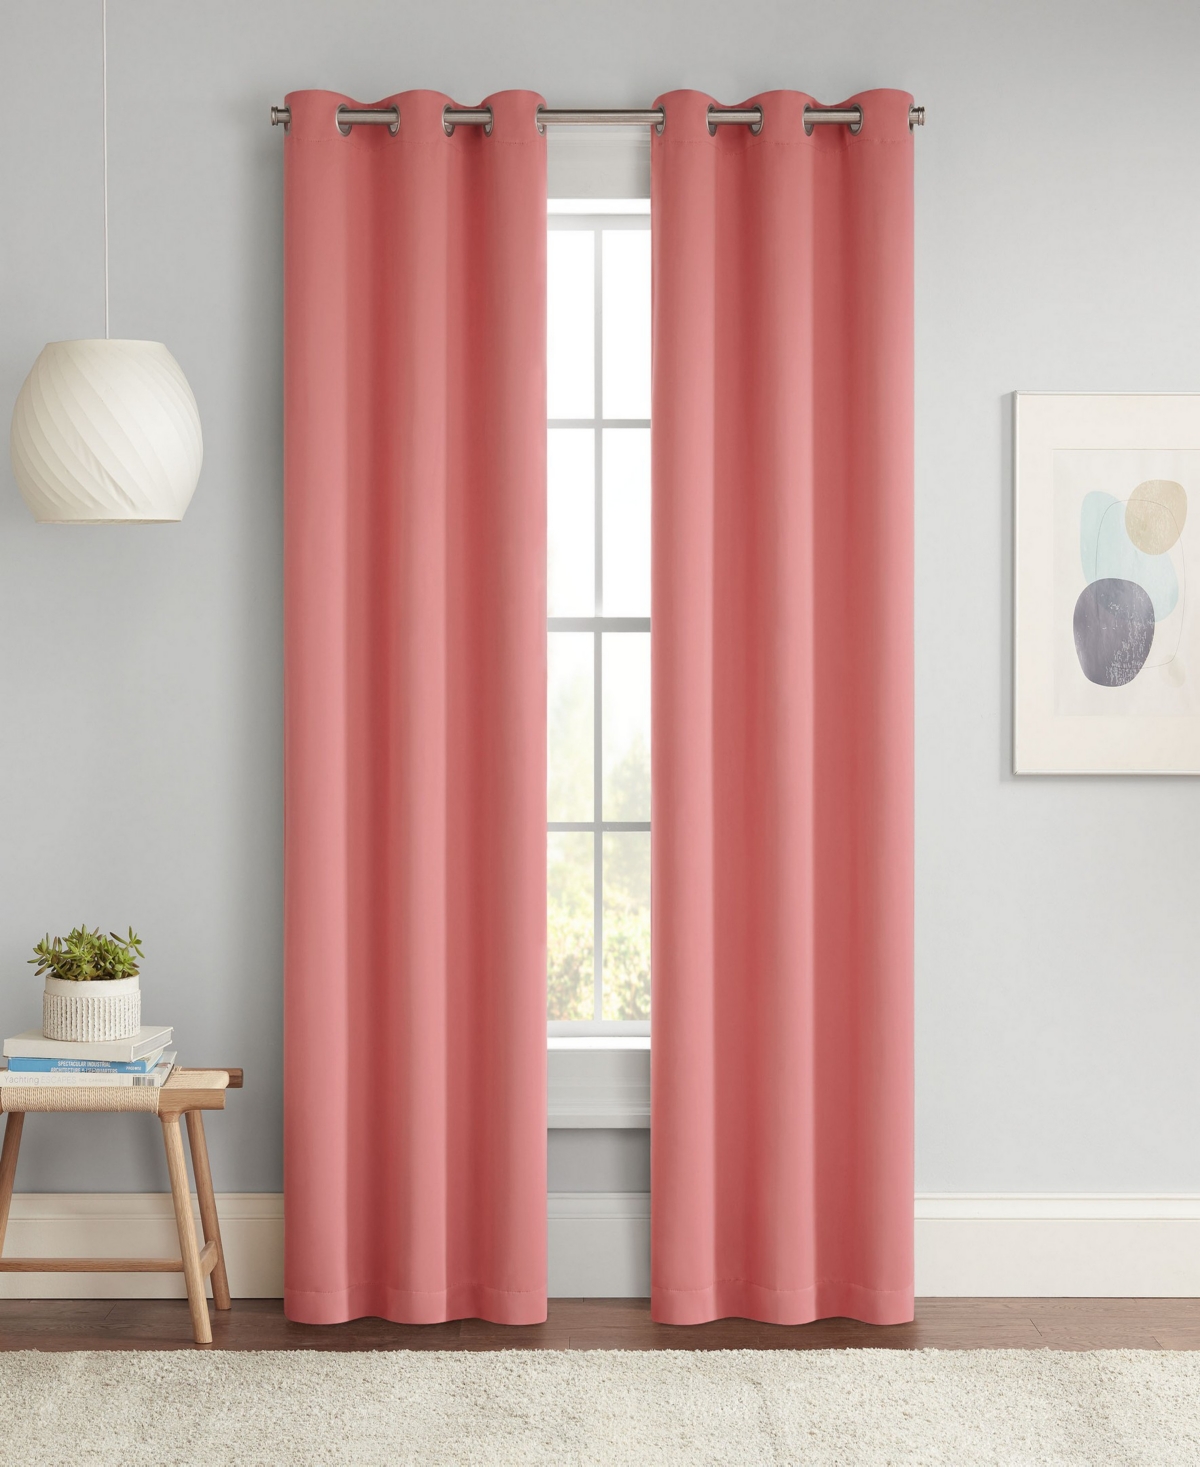 Eclipse Darrell Energy Saving Blackout Grommet Curtain Panel, 63" X 37" In Coral